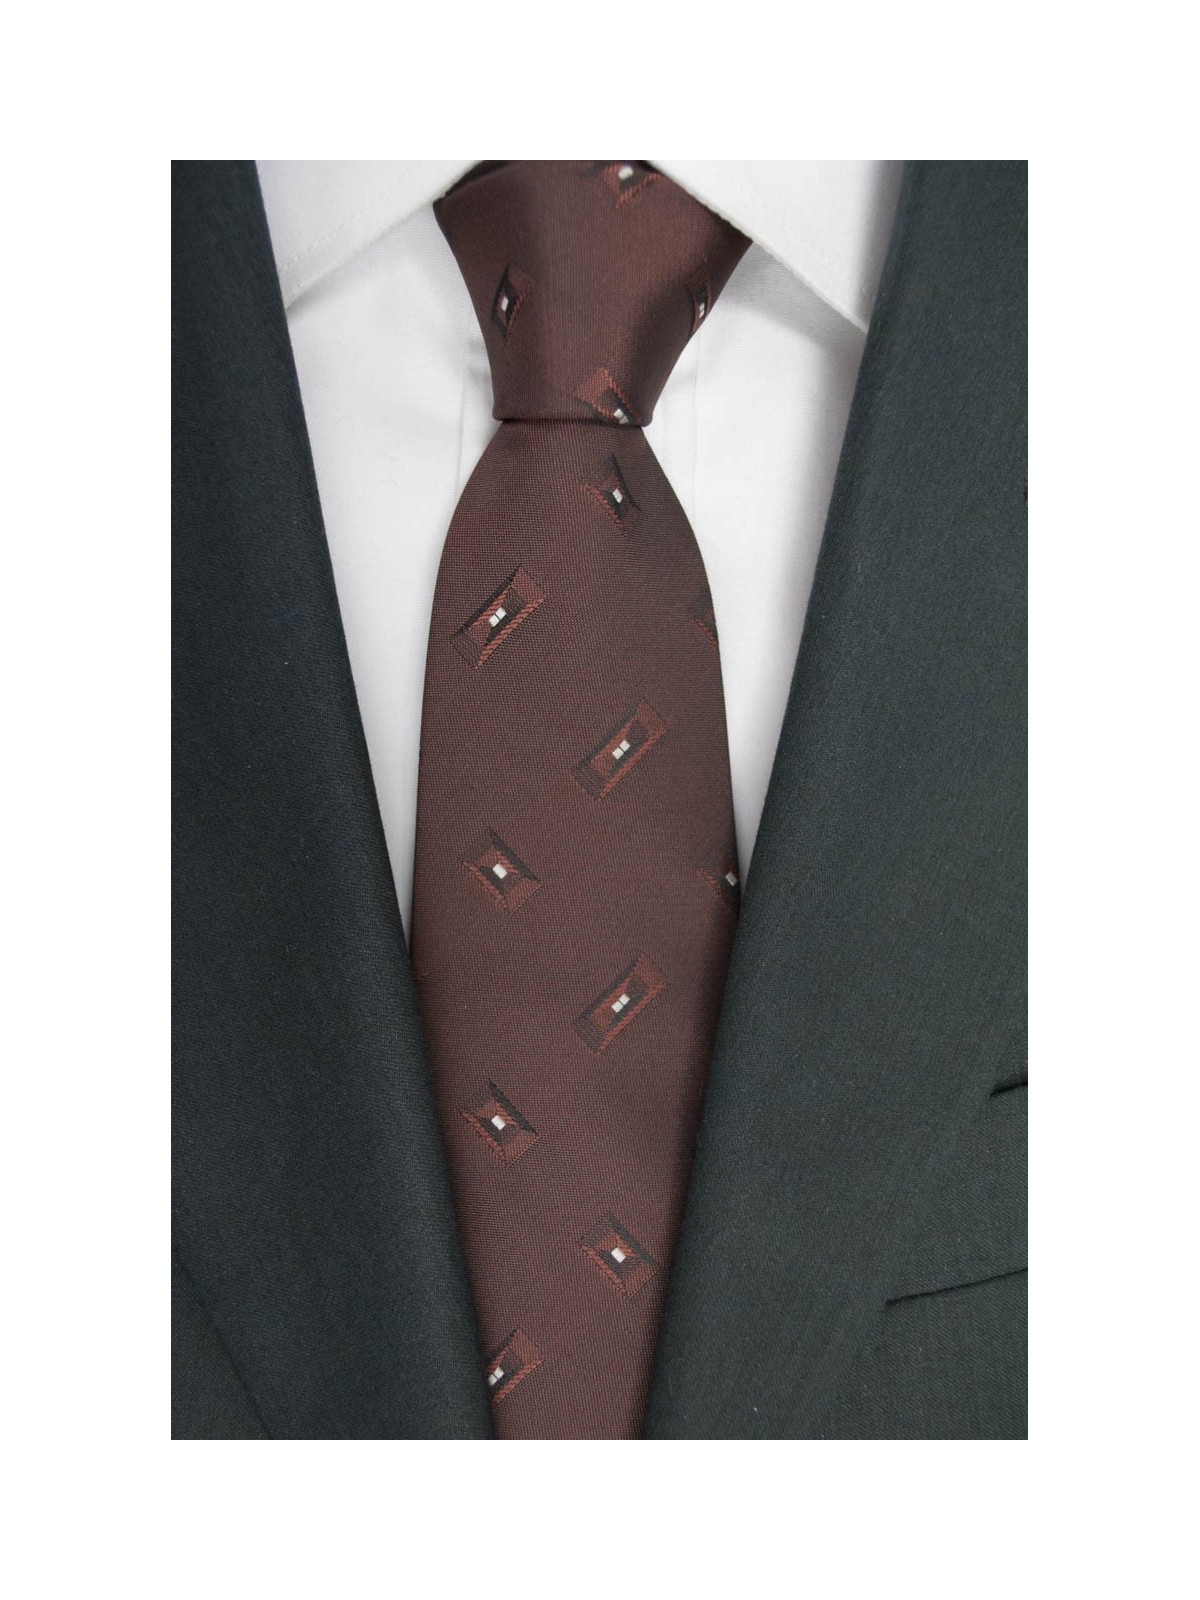 Brown tie with Small Designs - 100% Pure Silk - Made in Italy